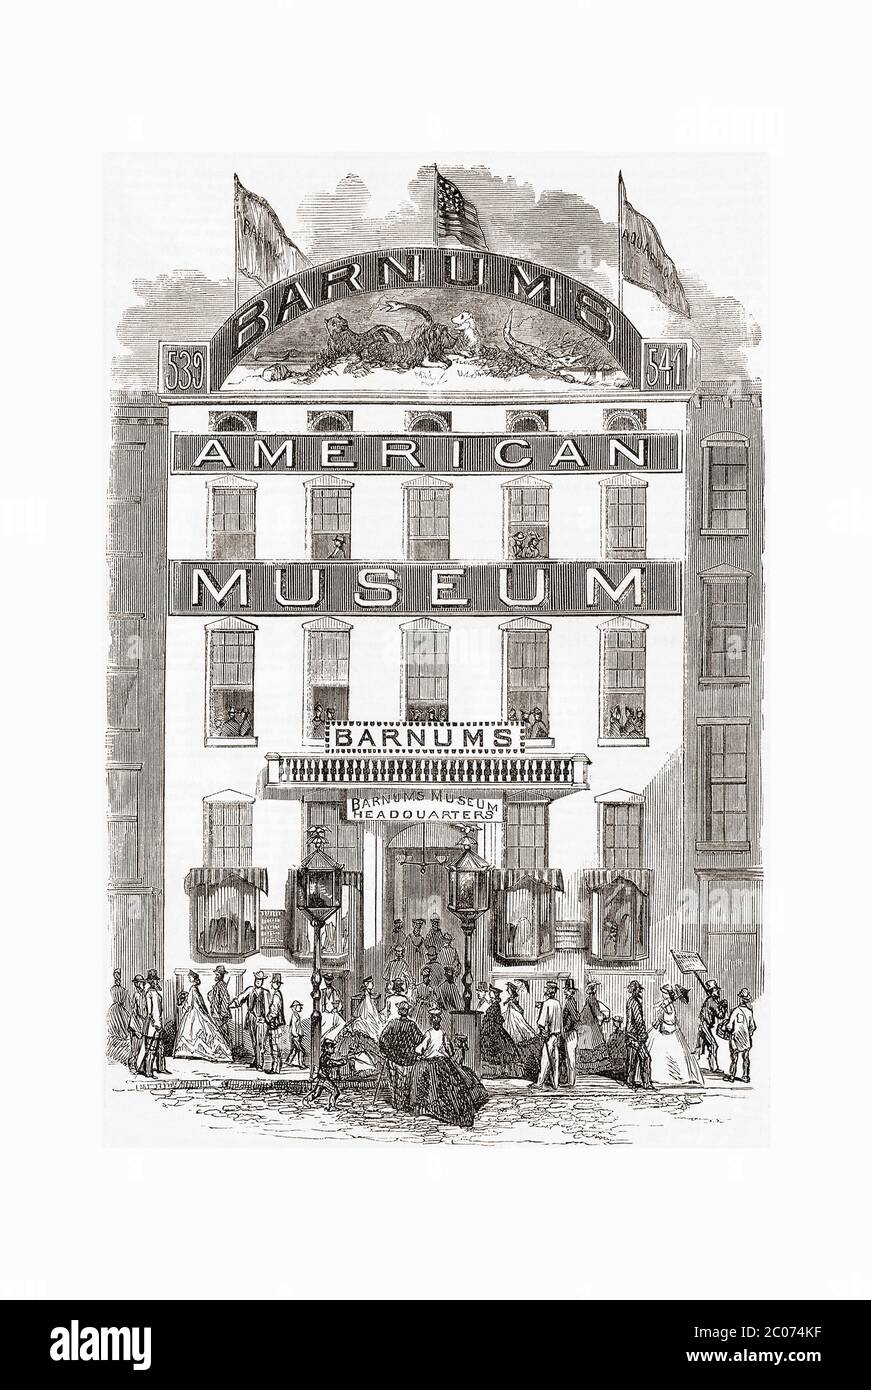 Barnum’s new American Museum on Broadway, New York, USA.  After an engraving in Frank Leslie's illustrated newspaper,  September 30, 1865.  P. T. Barnum - he of Barnum & Bailey circus fame - opened his original American Museum in 1841.  It burned down in 1865.   Later that same year he opened the new American Museum, pictured here.  In 1868 it also burned down. Stock Photo